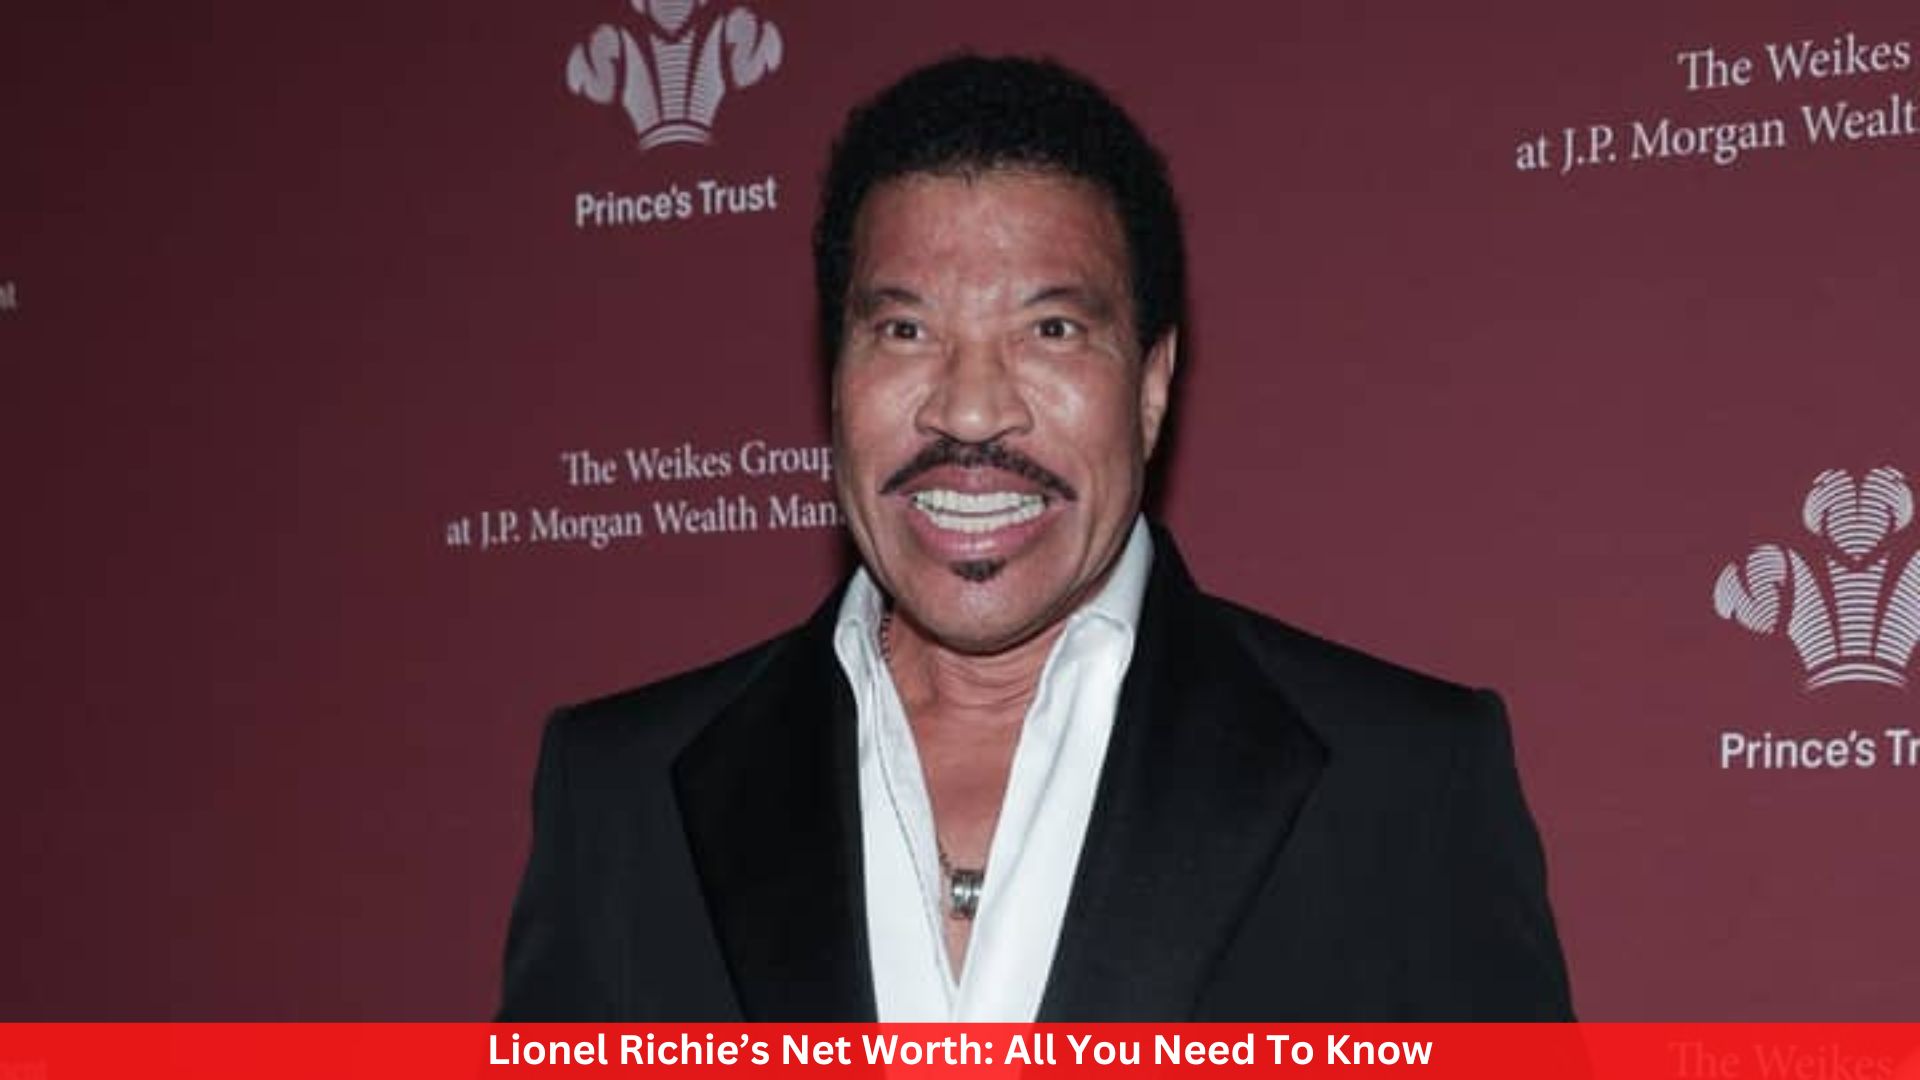 Lionel Richie’s Net Worth: All You Need To Know